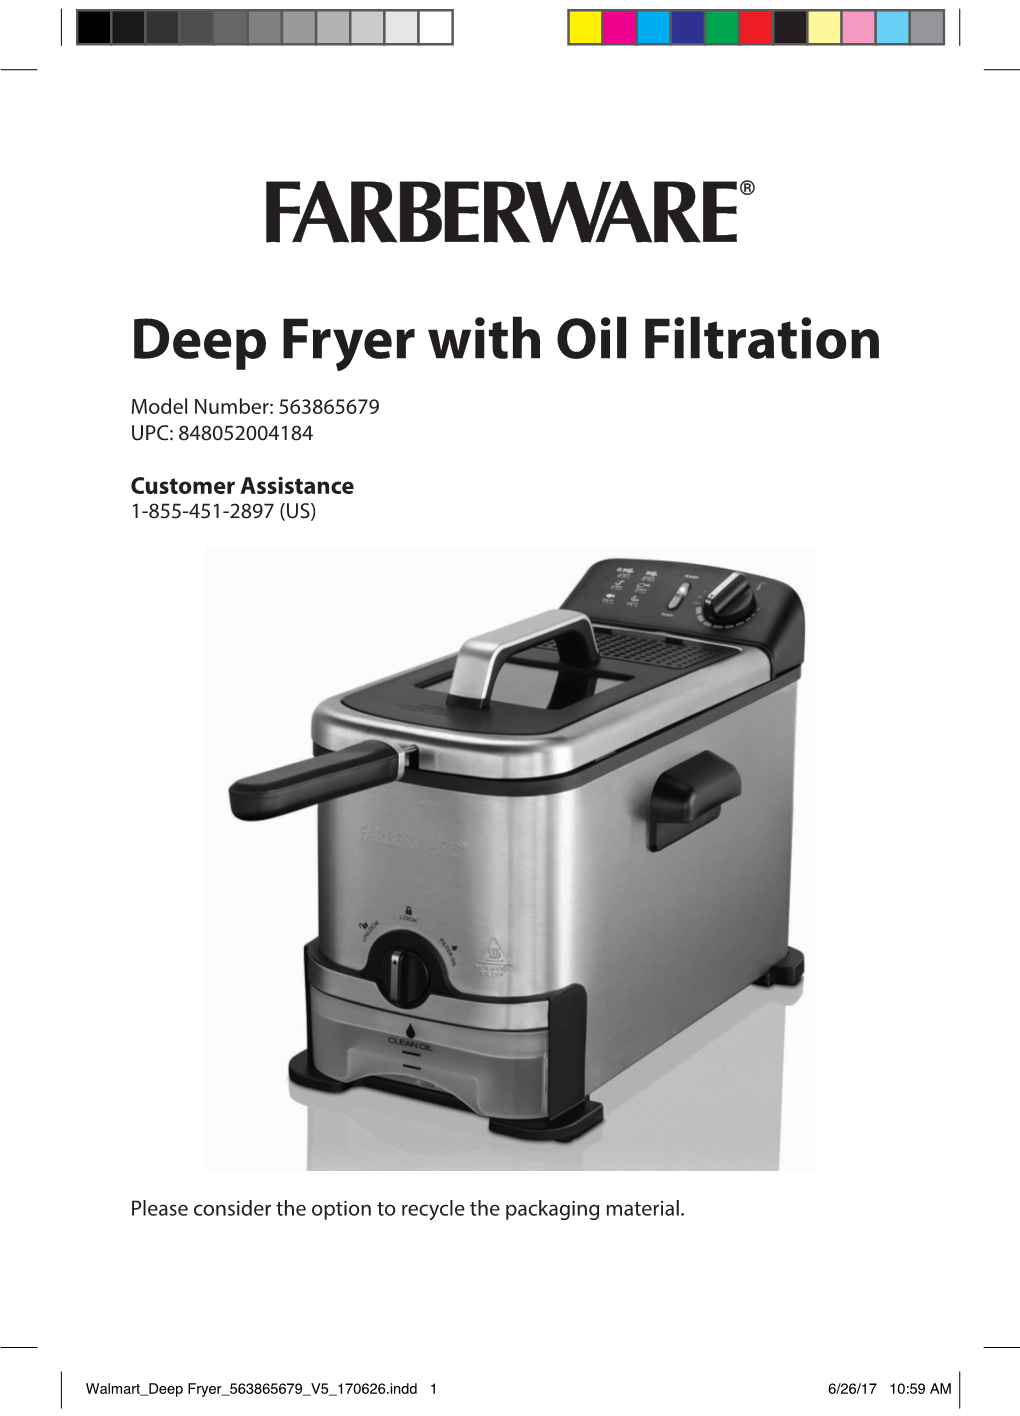 Deep Fryer with Oil Filtration